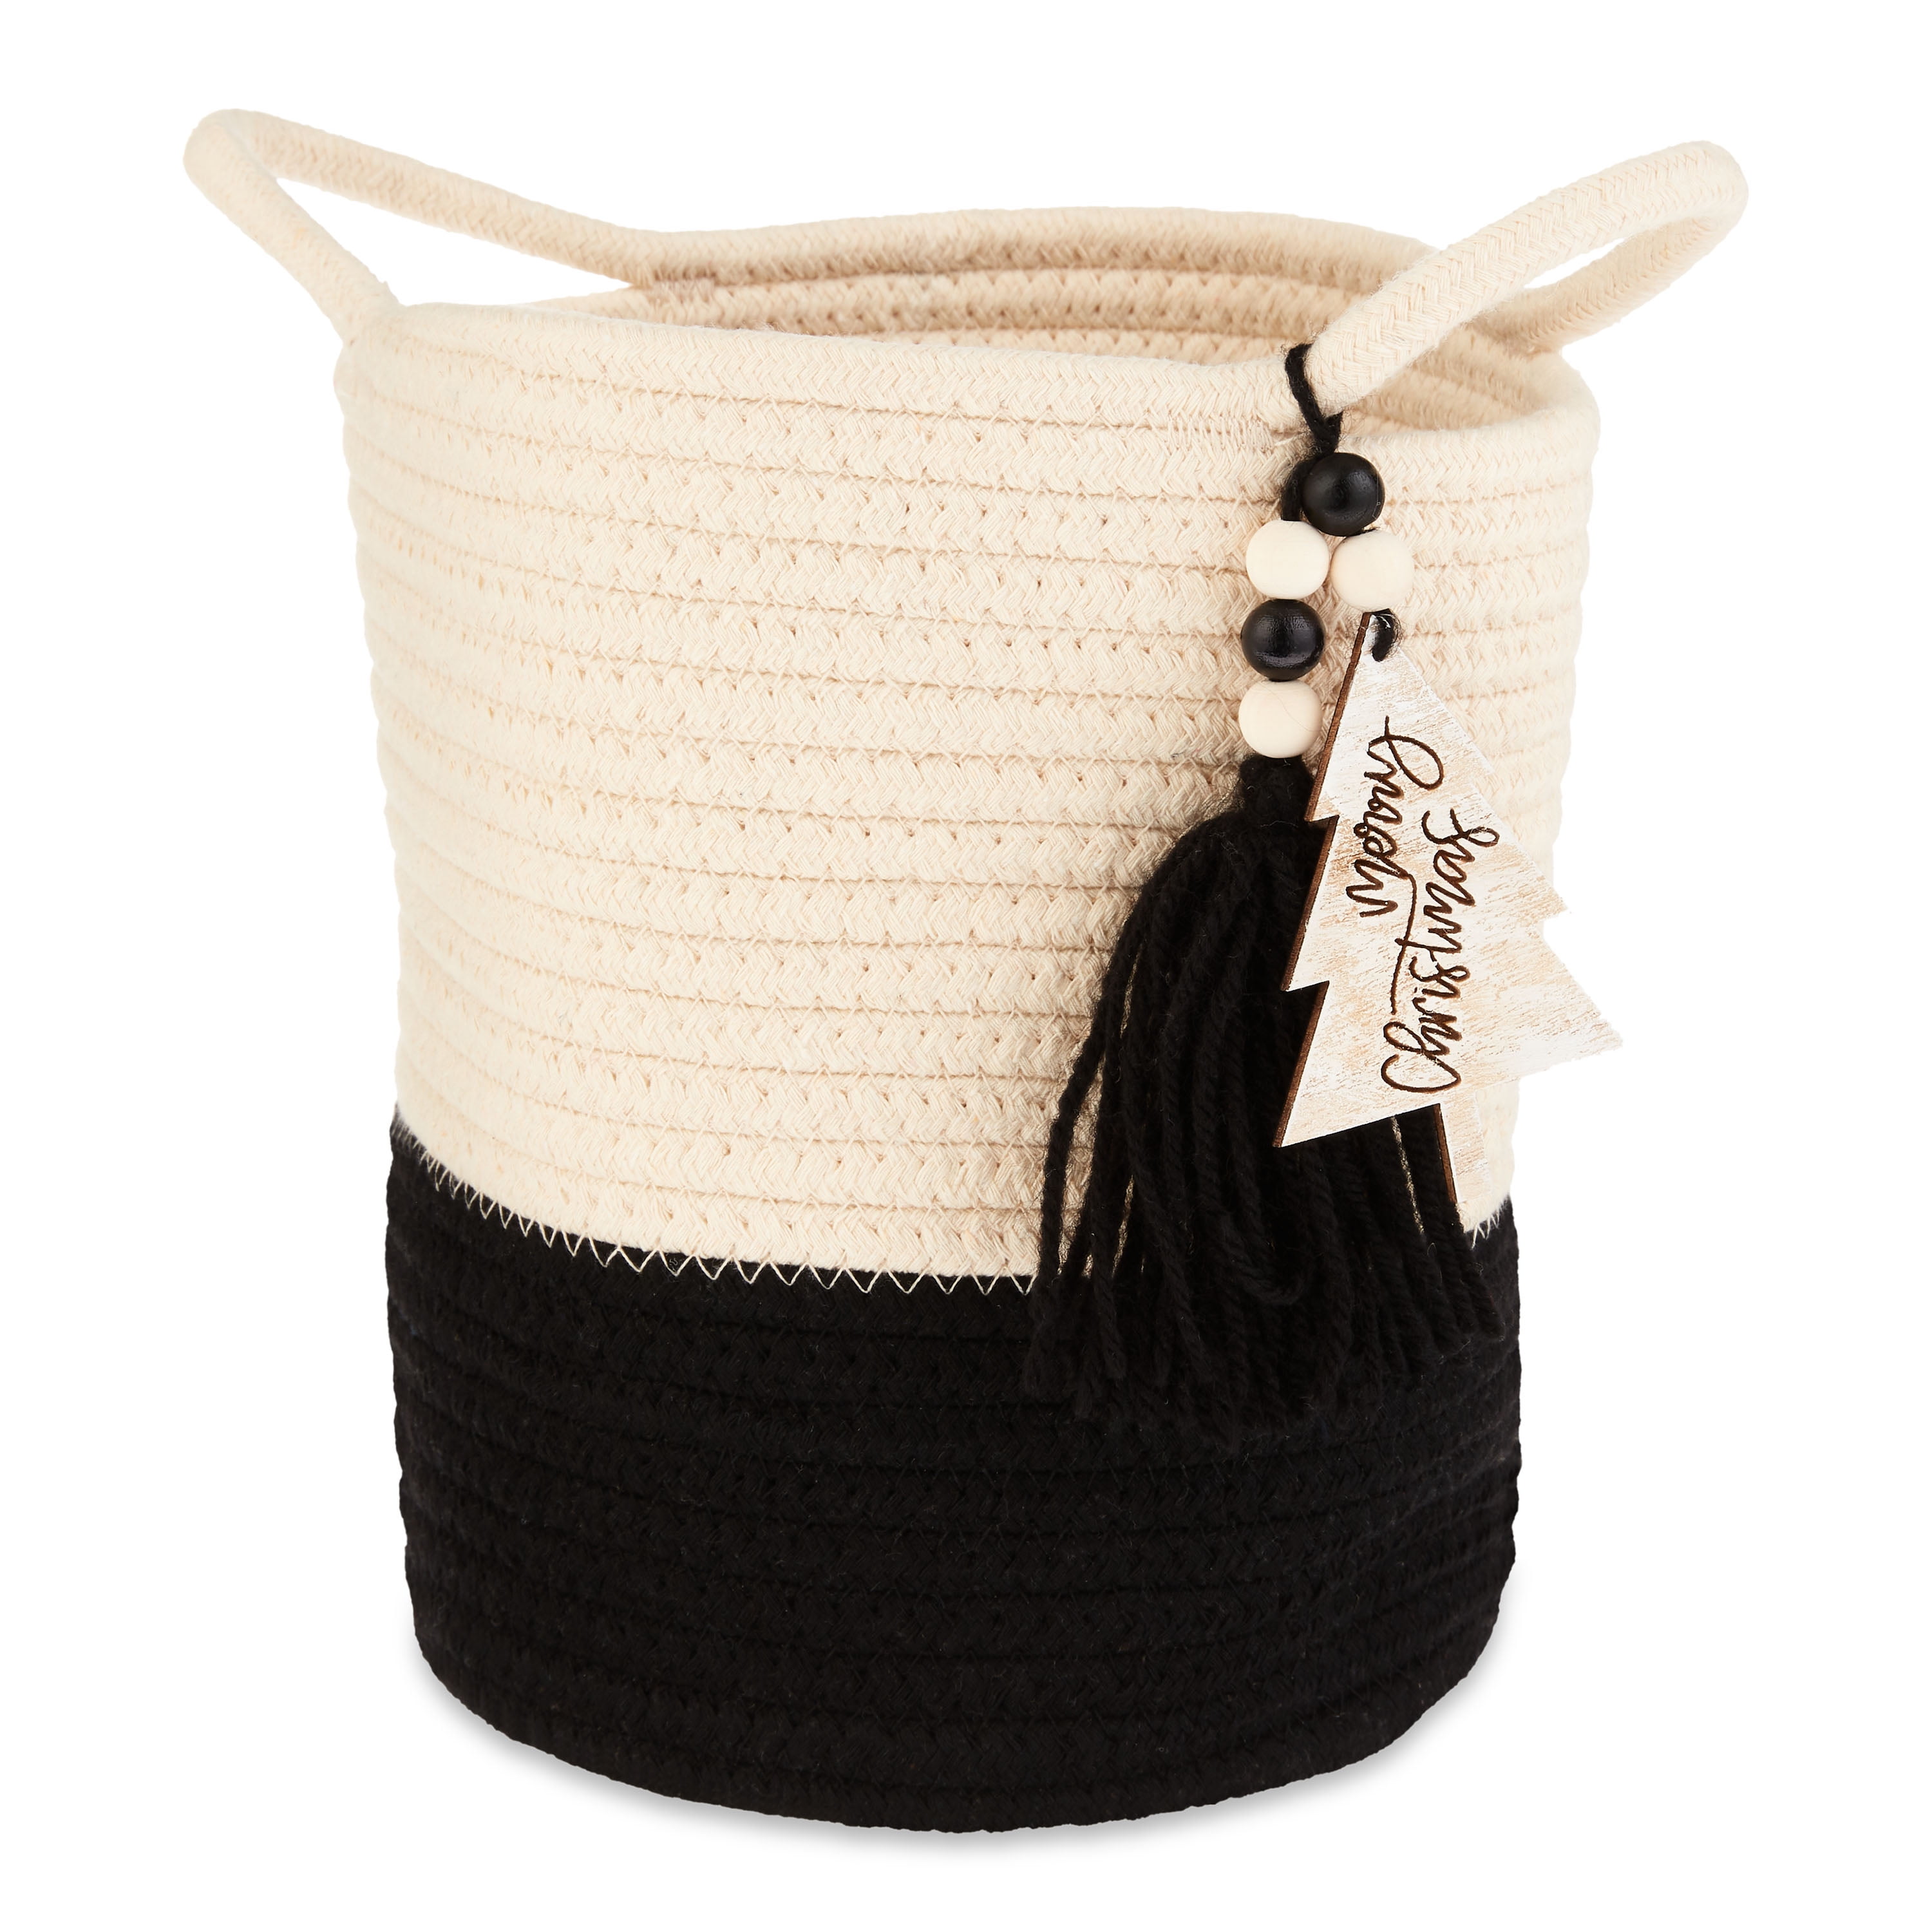 Holiday Time Simple Season Black and White Rope "Merry Christmas" Container Decorations, 8.7"H